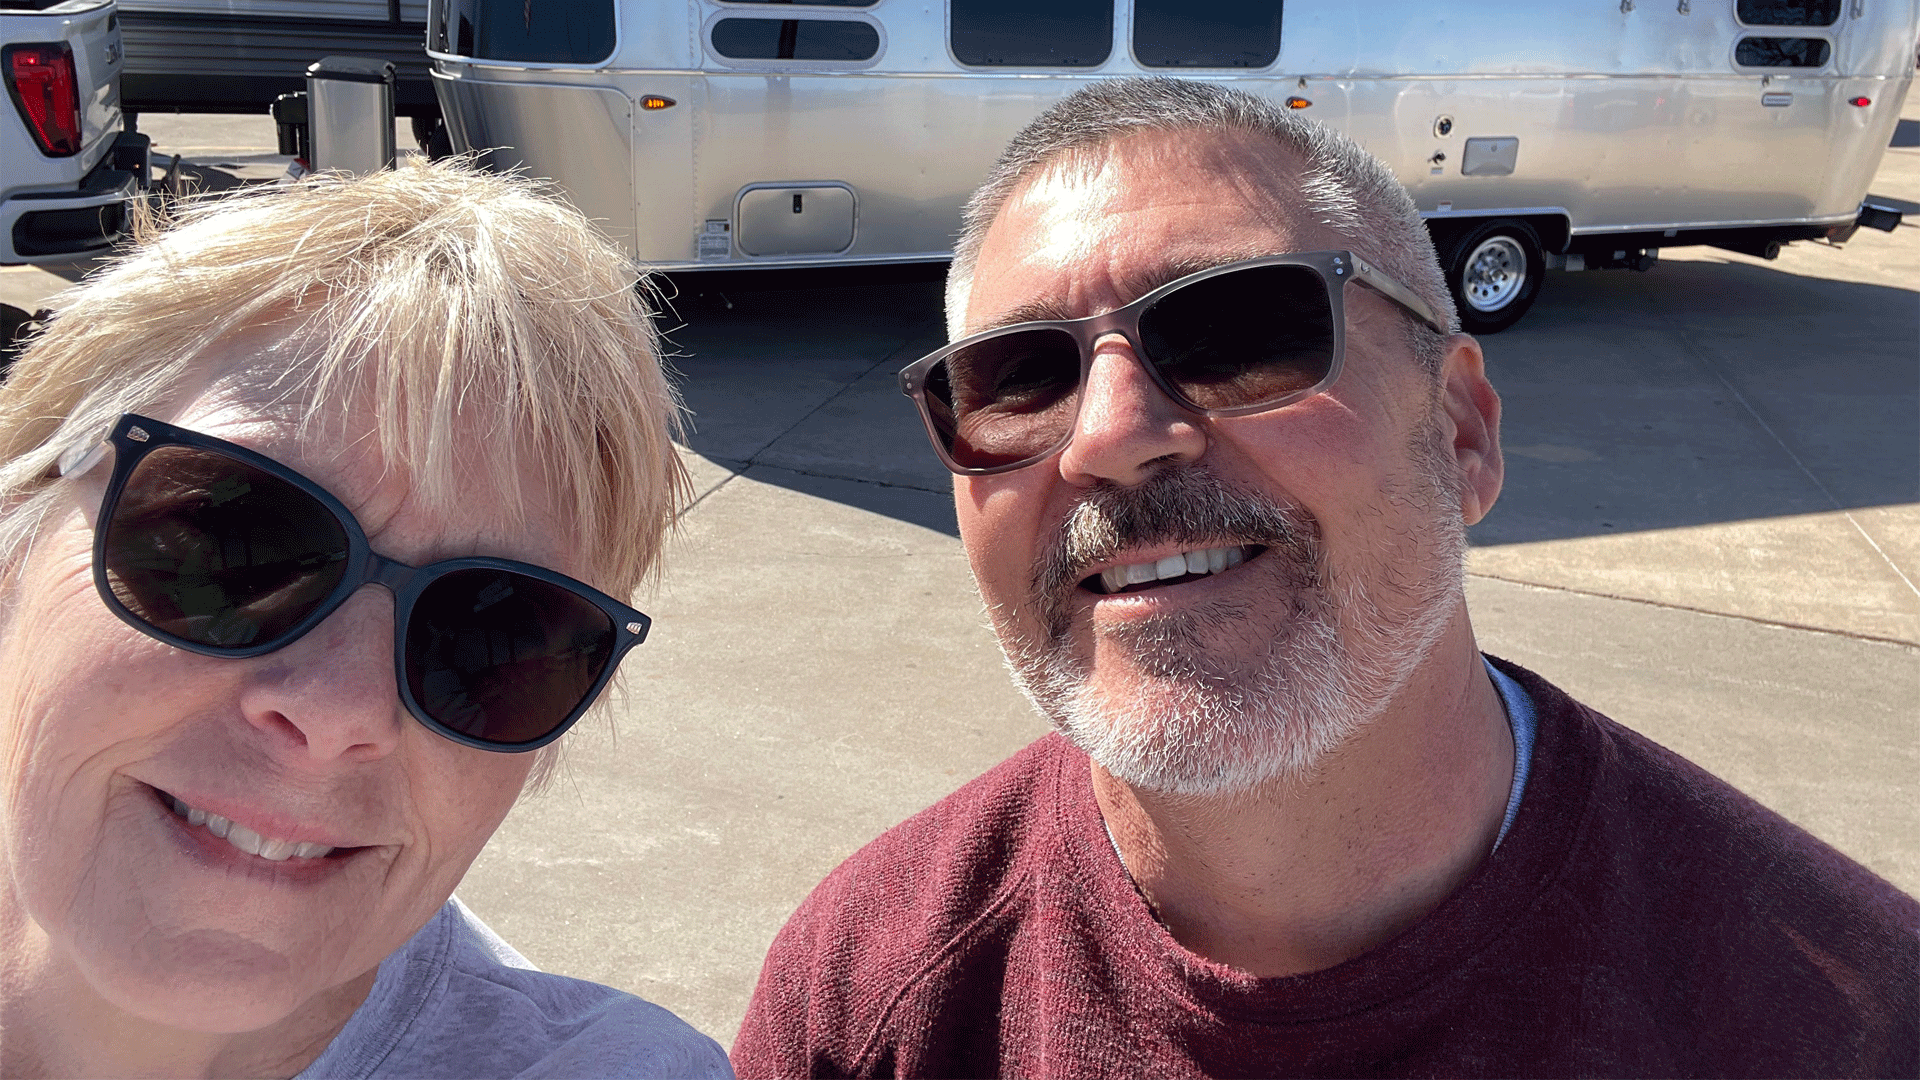 Jim and Susan taking a picture with their new Airstream International camper while they are at the dealership.